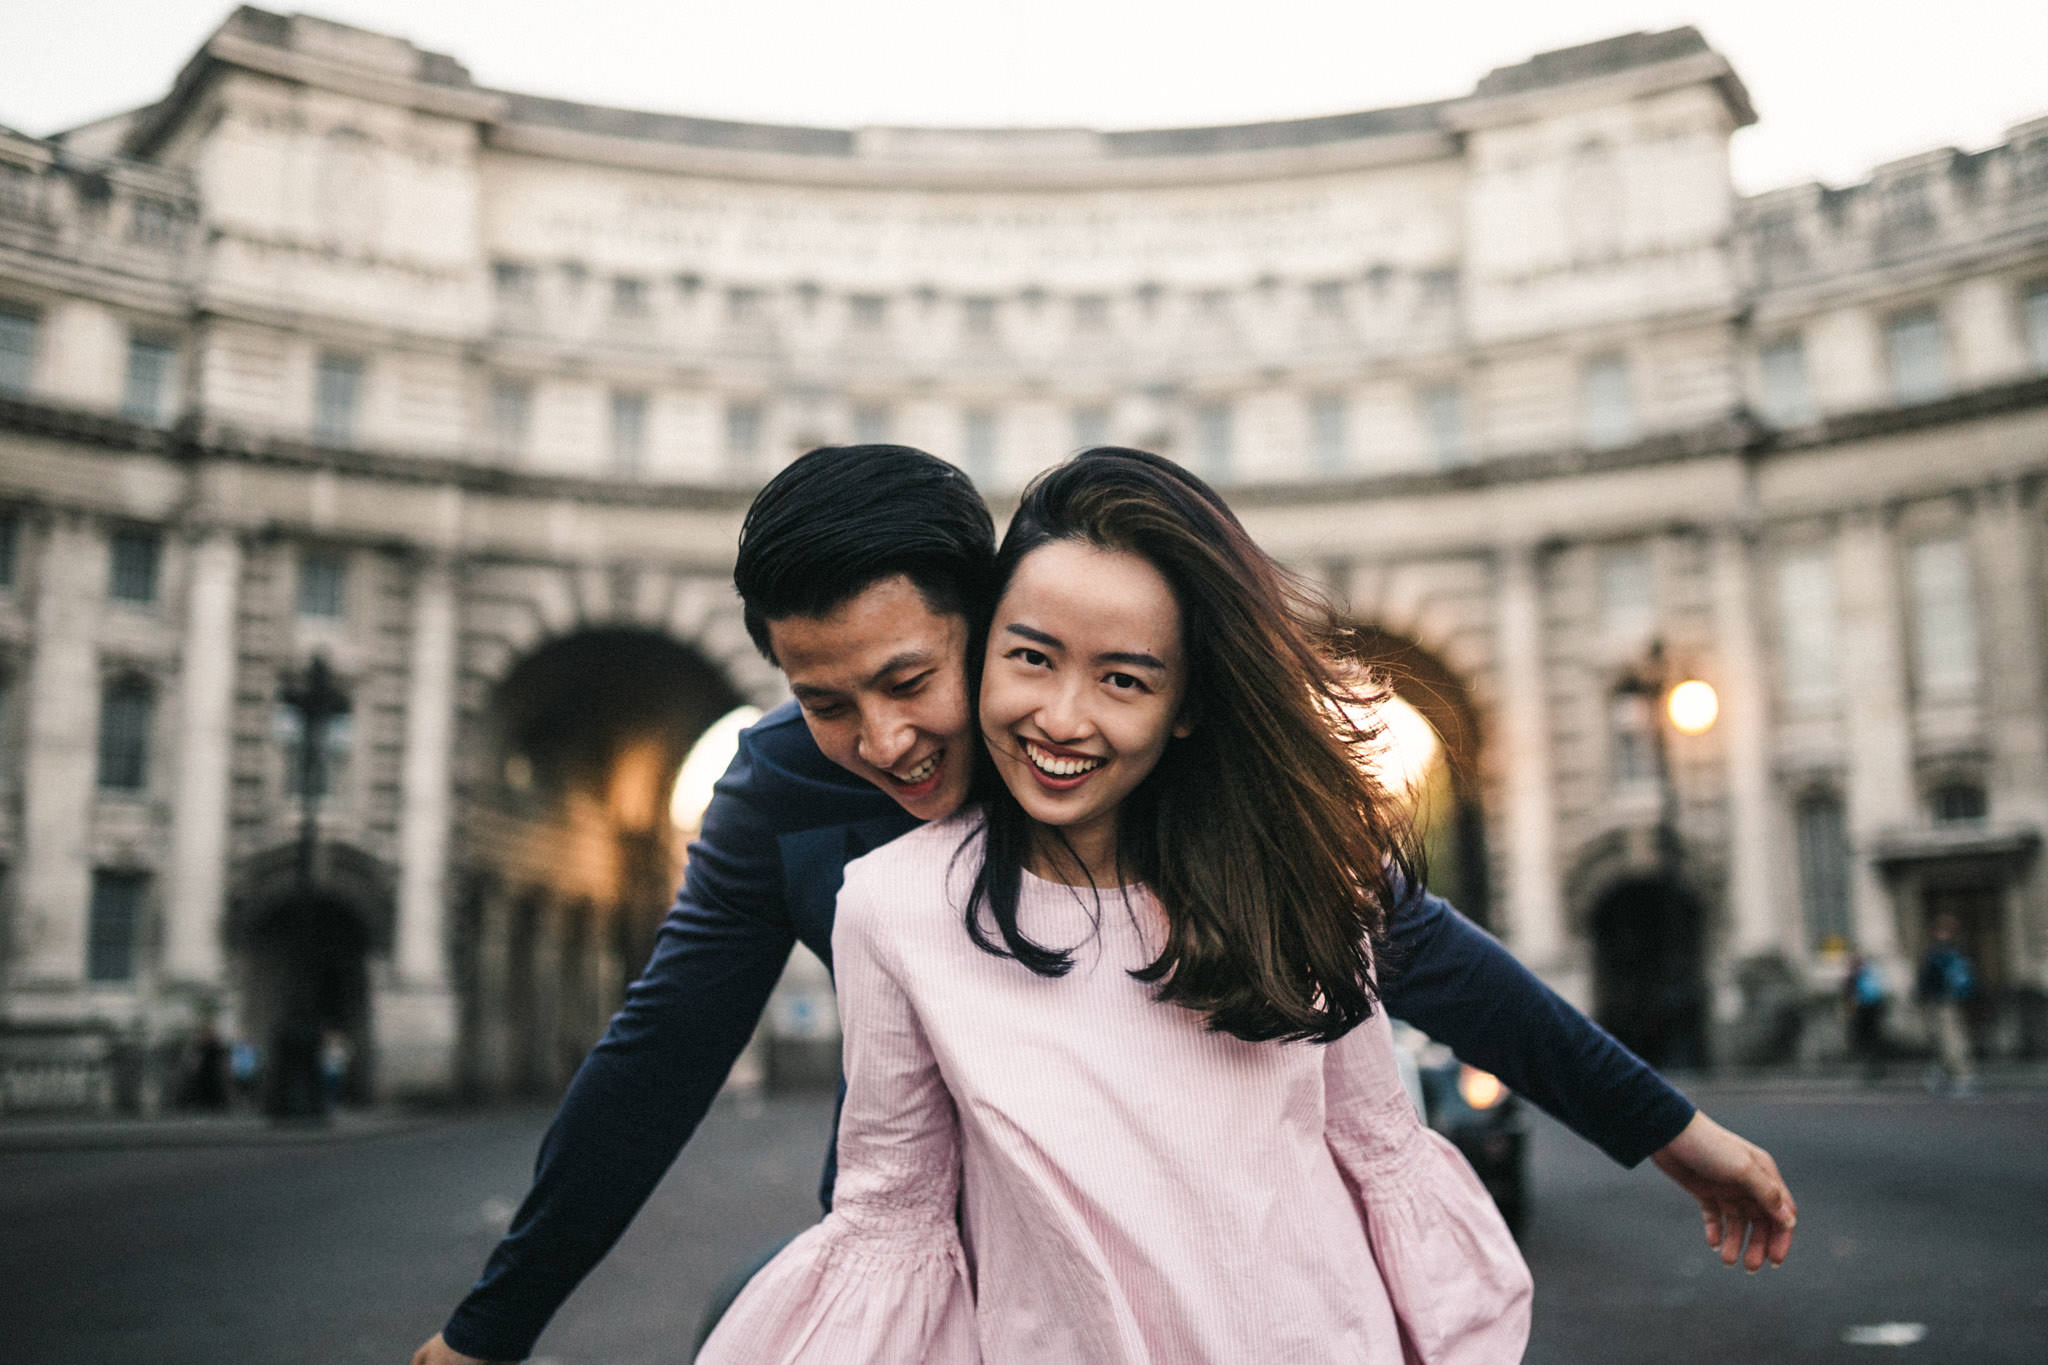 Engagement shoot locations in london